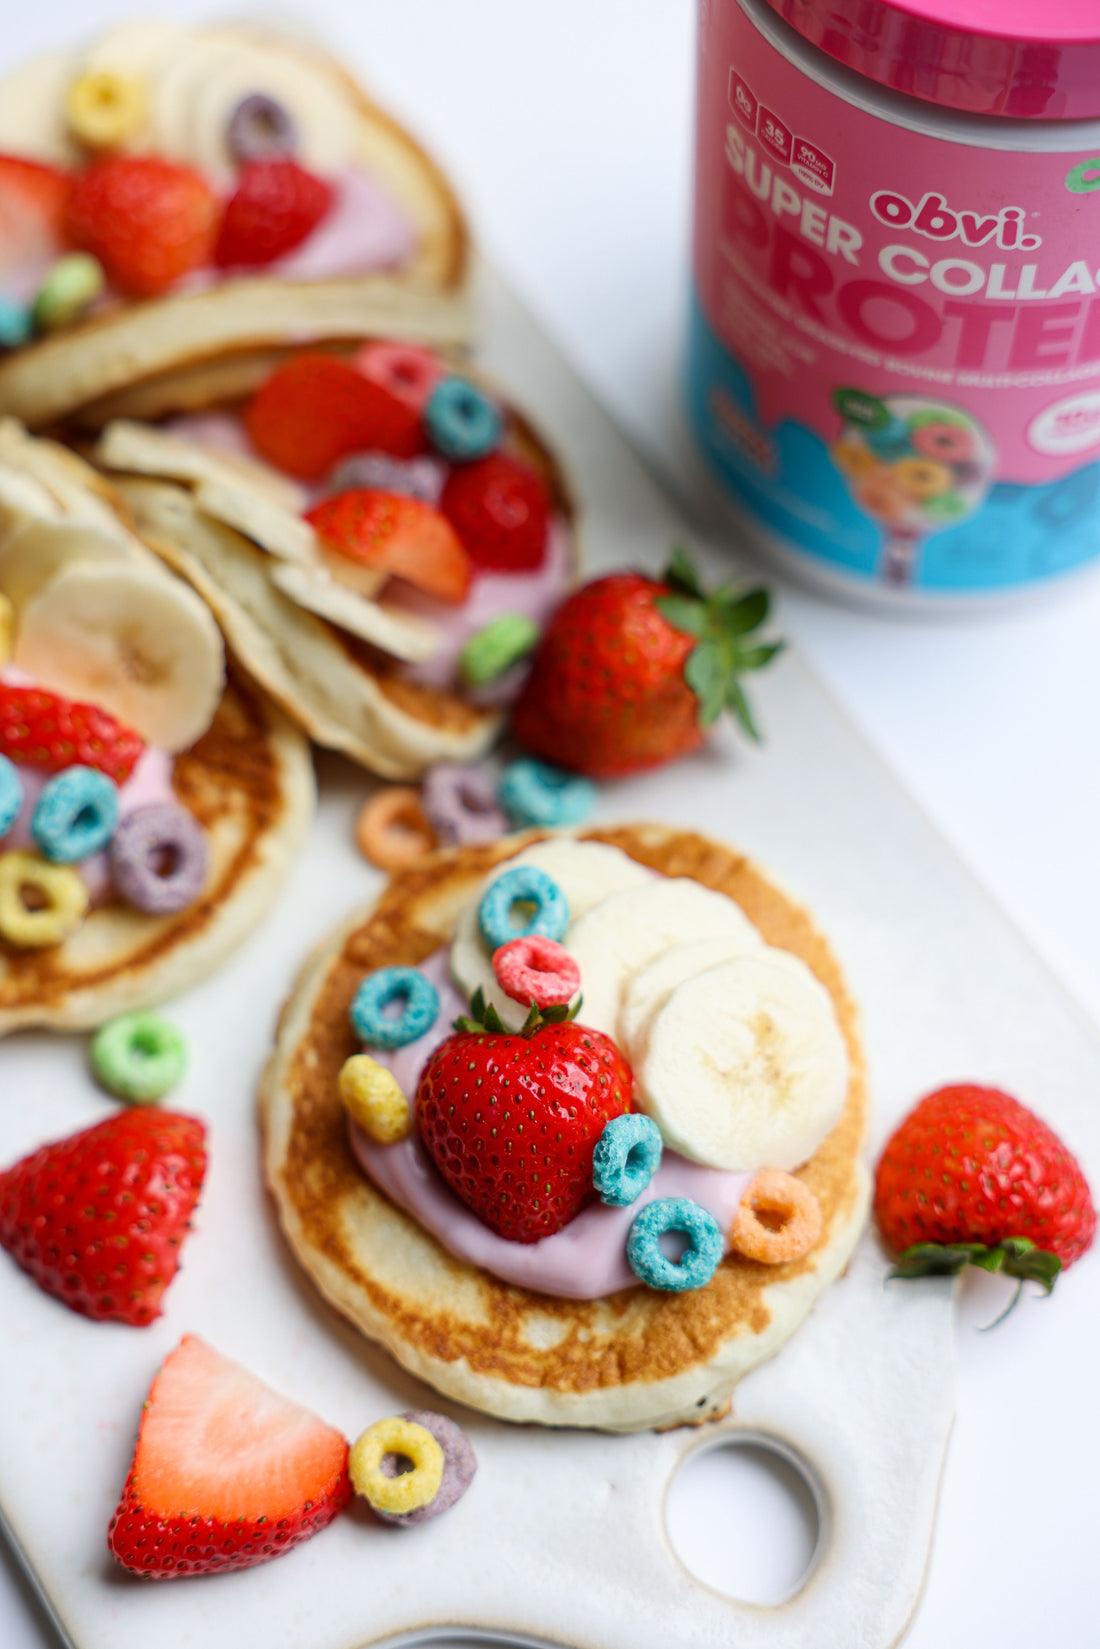 Obvi's Super Collagen Protein Fruity Cereal Pancakes